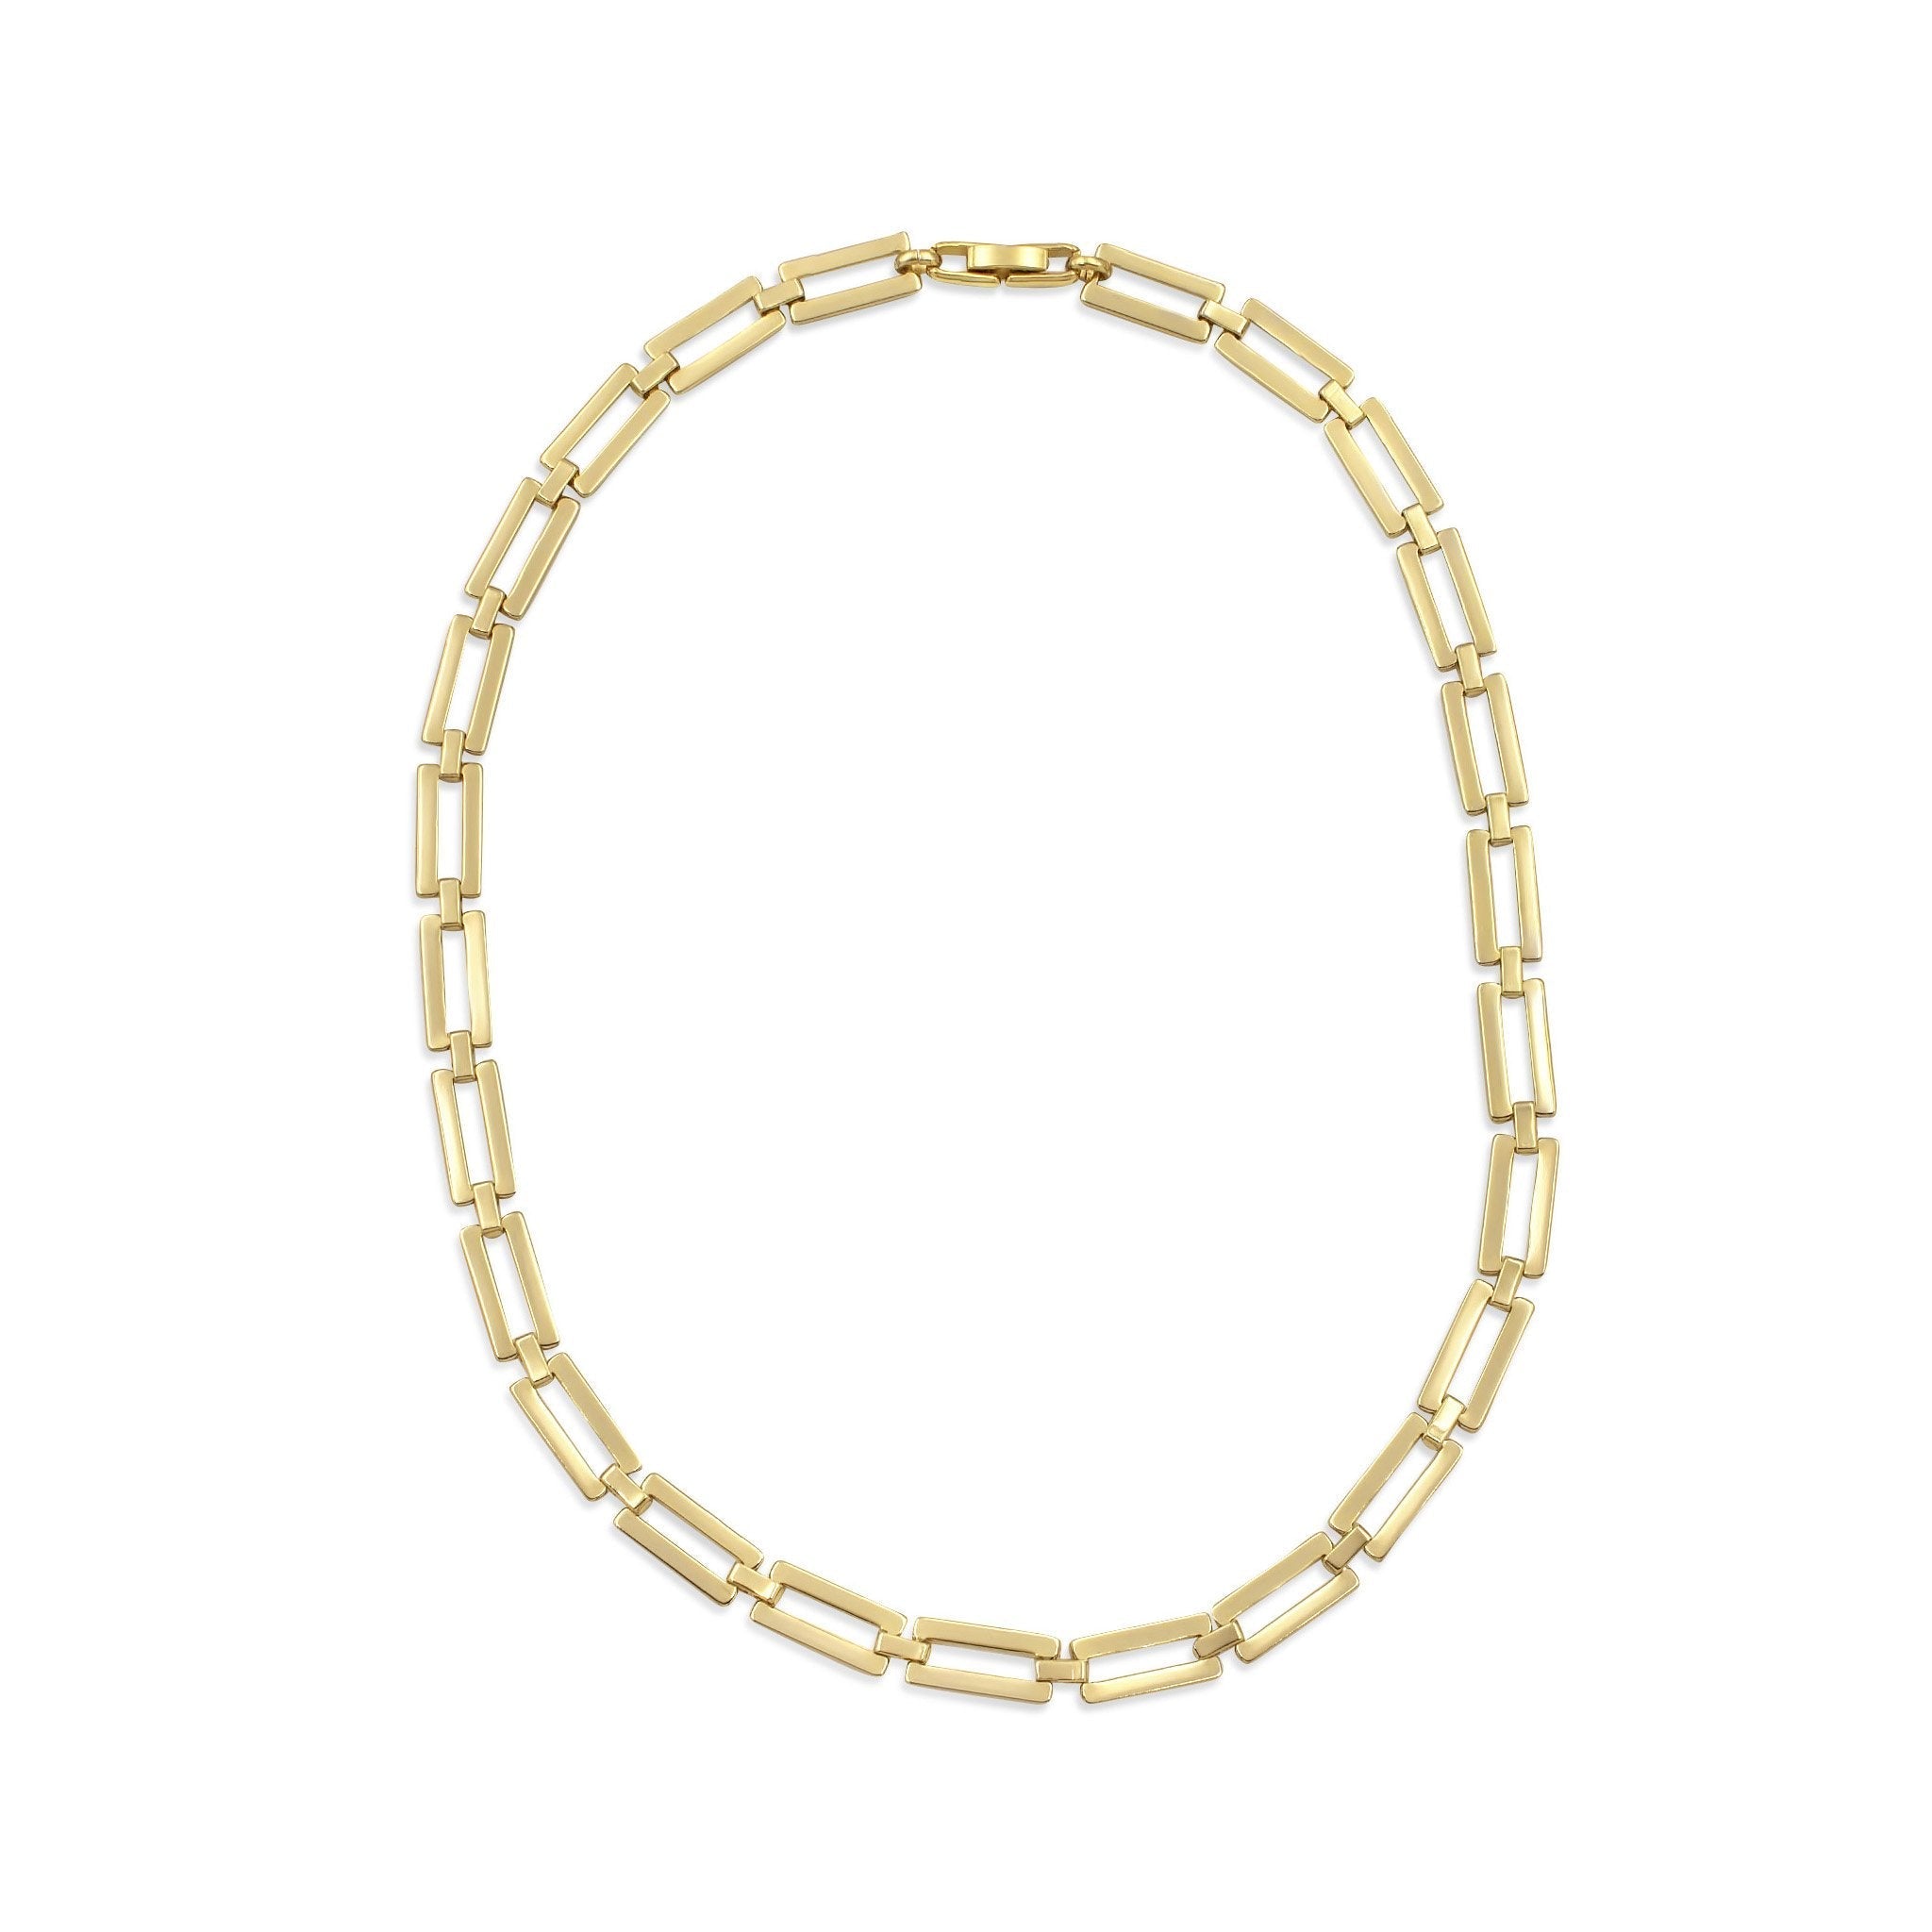 Ares - Rectangular Link Chain - Camille Jewelry